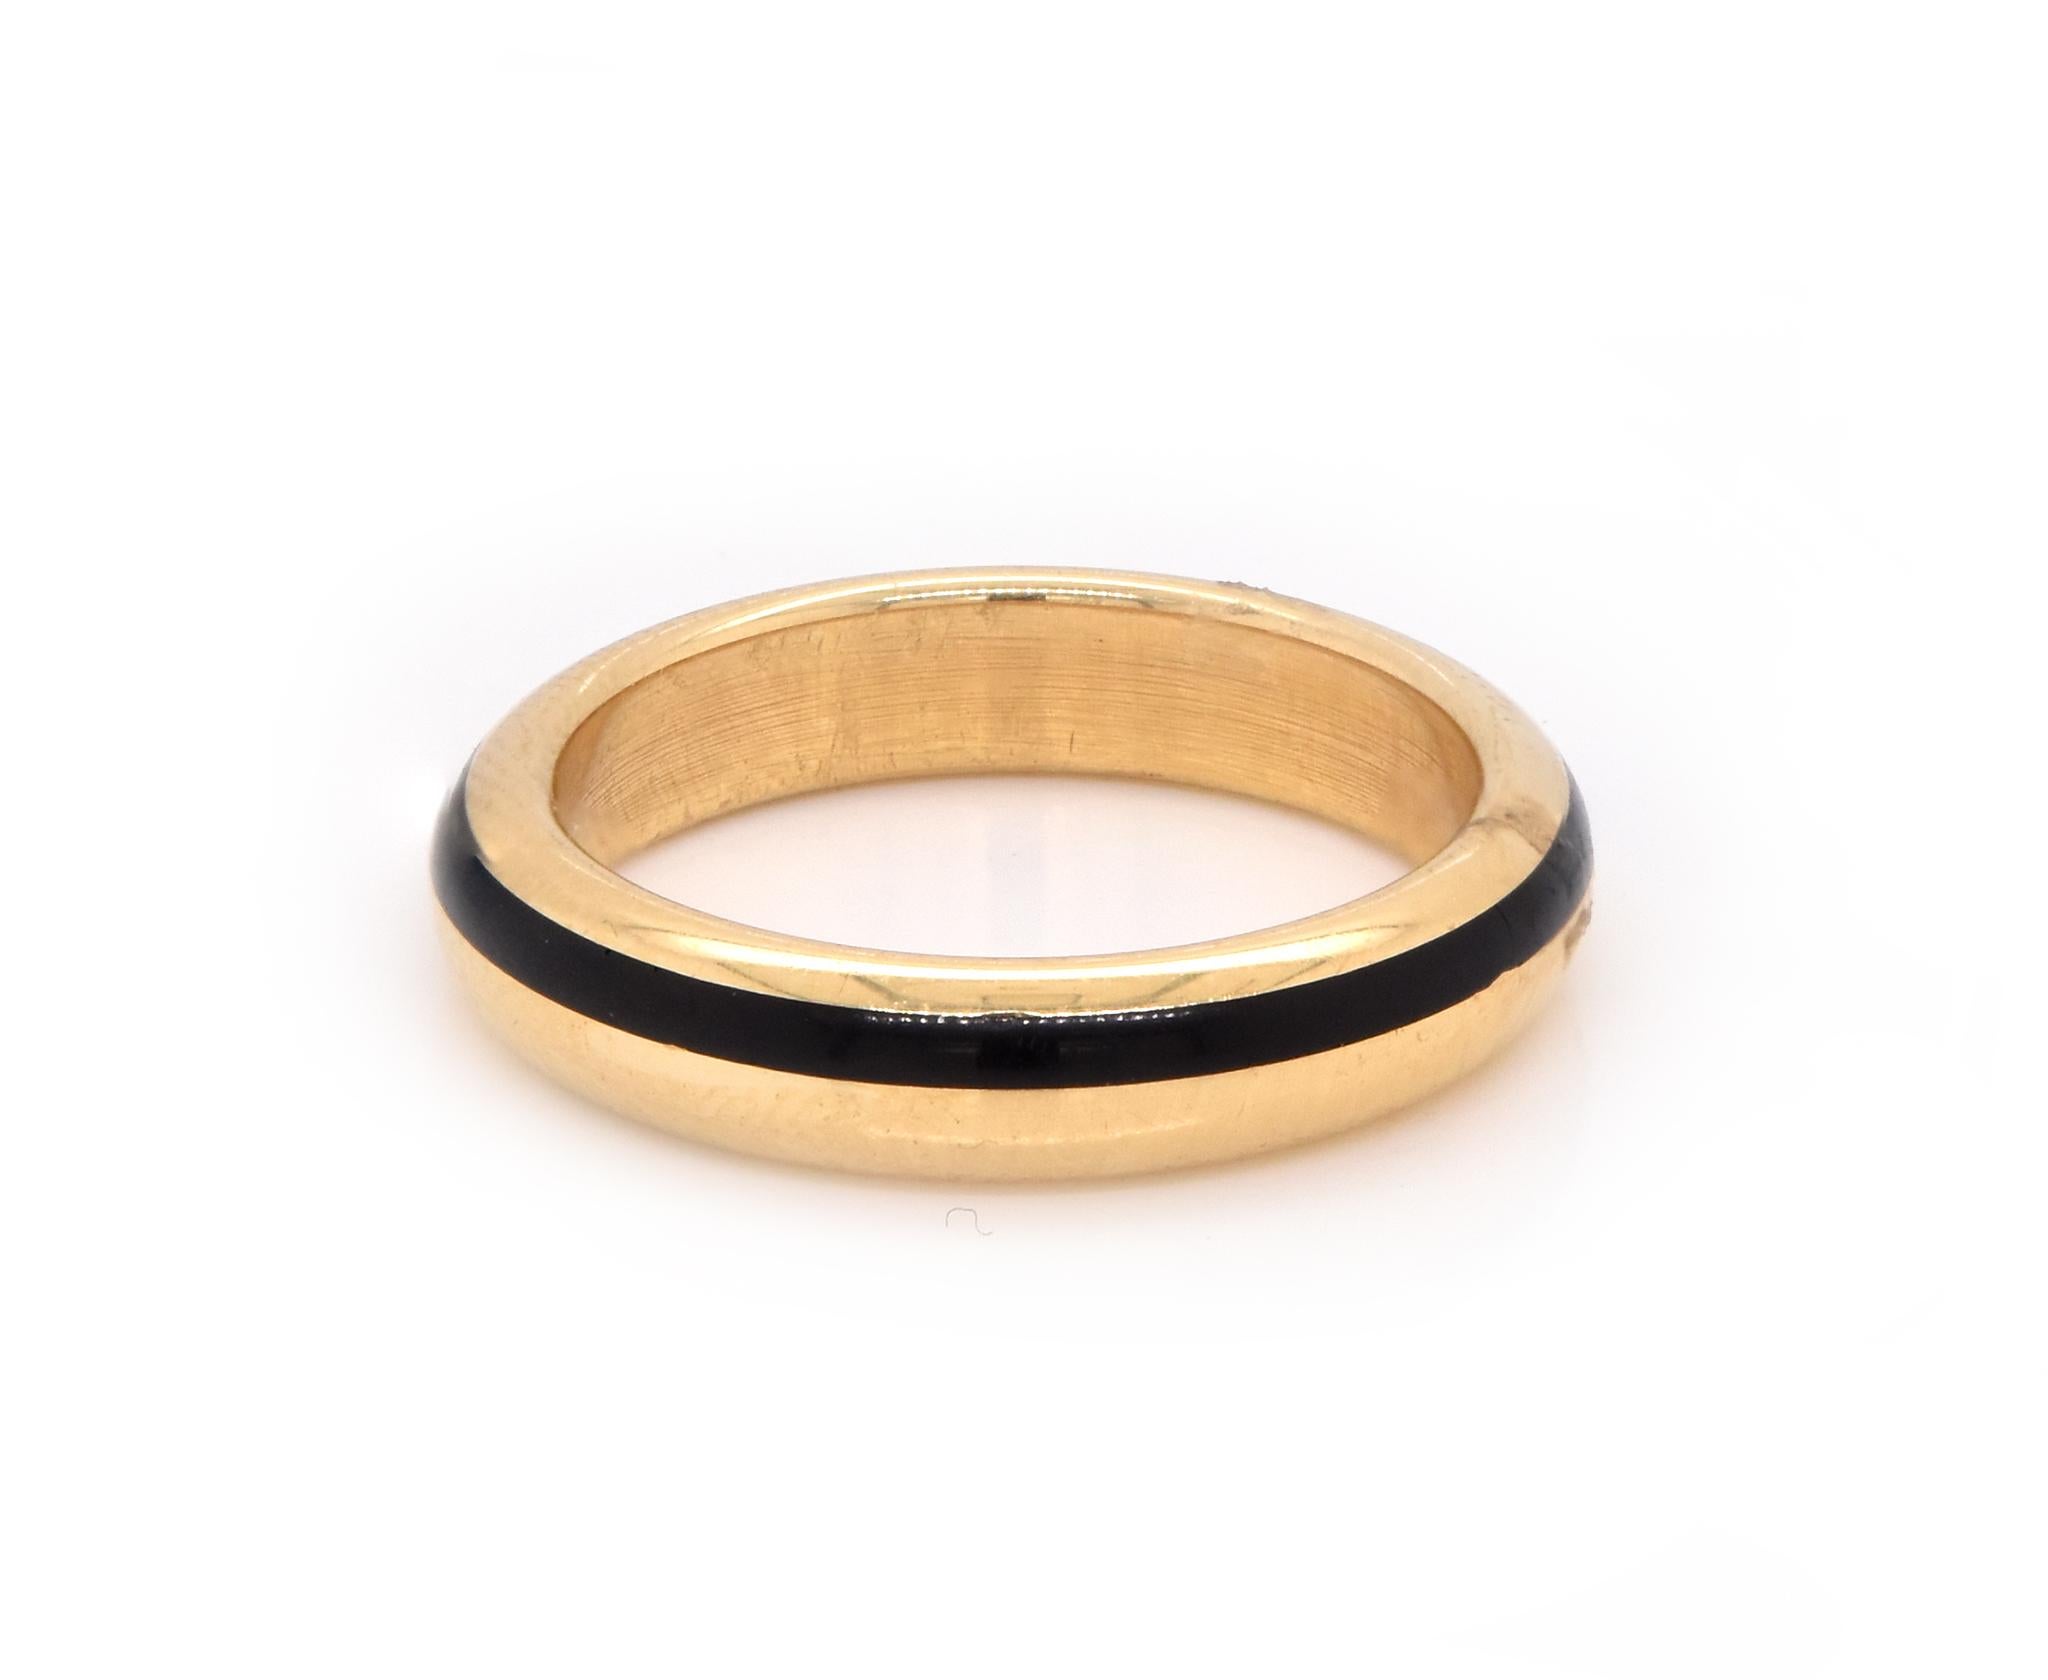 Designer: custom
Material: 18K yellow gold
Ring Size: 5 (please allow up to 2 additional business days for sizing requests)
Dimensions: ring top measures 3.82mm
Weight:  5.04 grams
